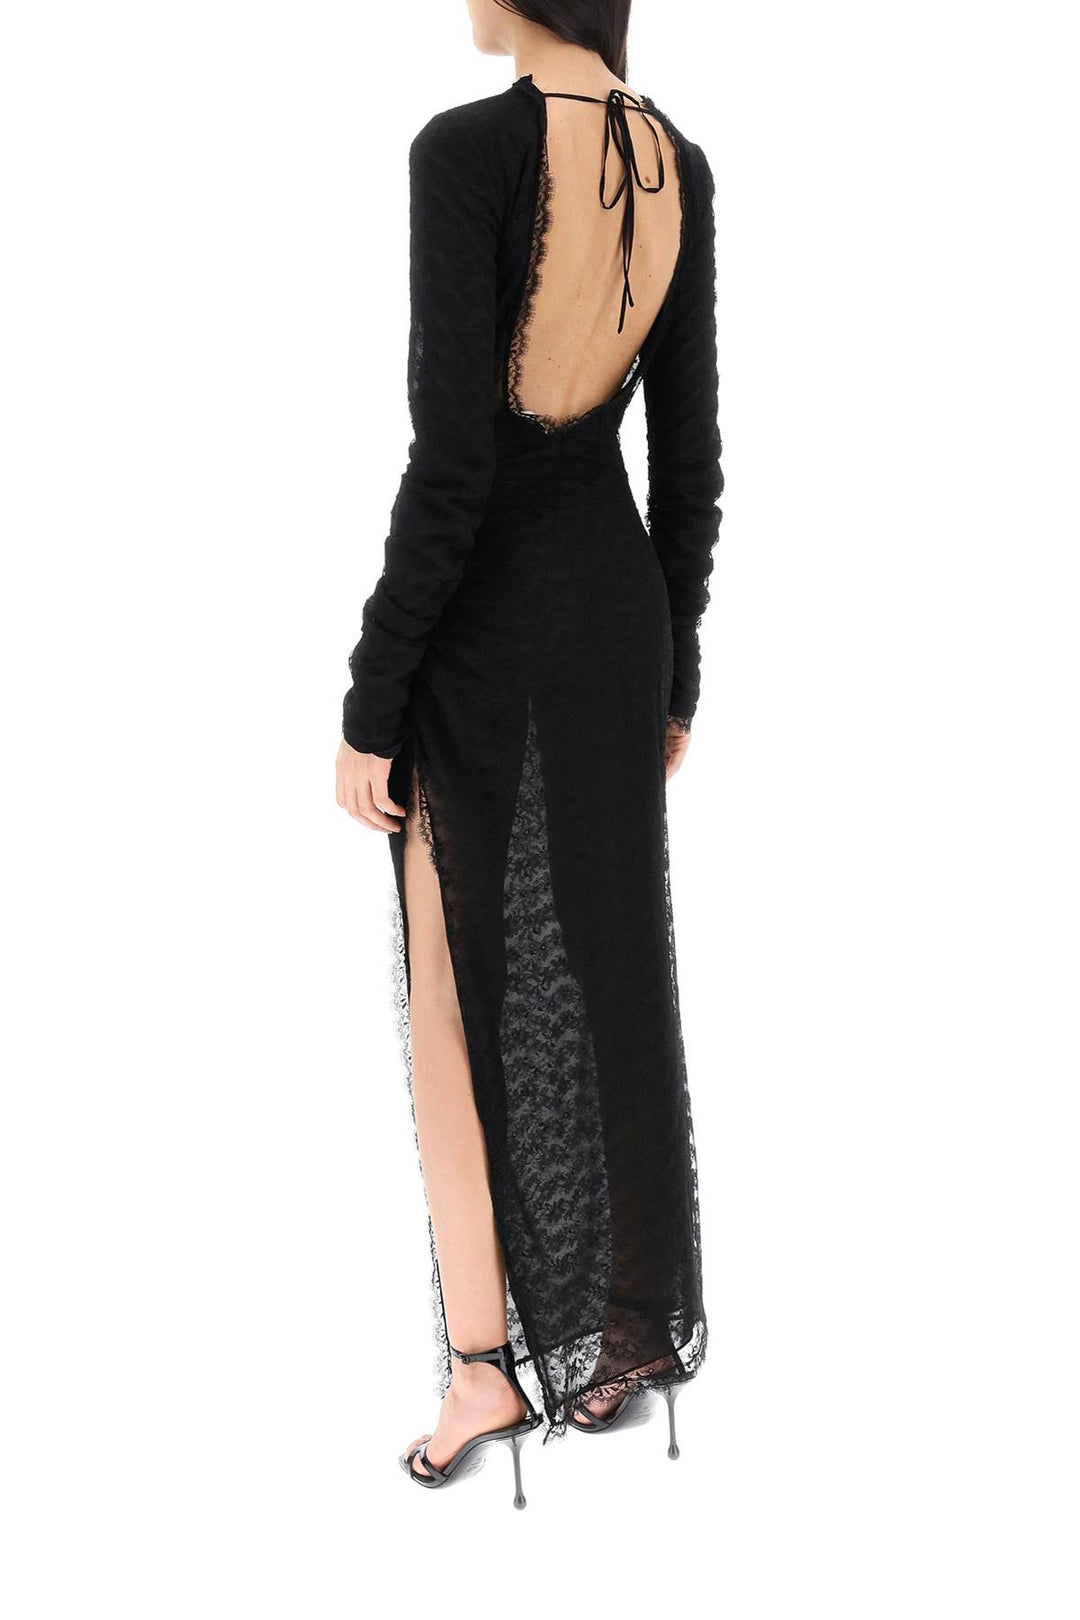 Alessandra Rich Long Lace Gown   Nero